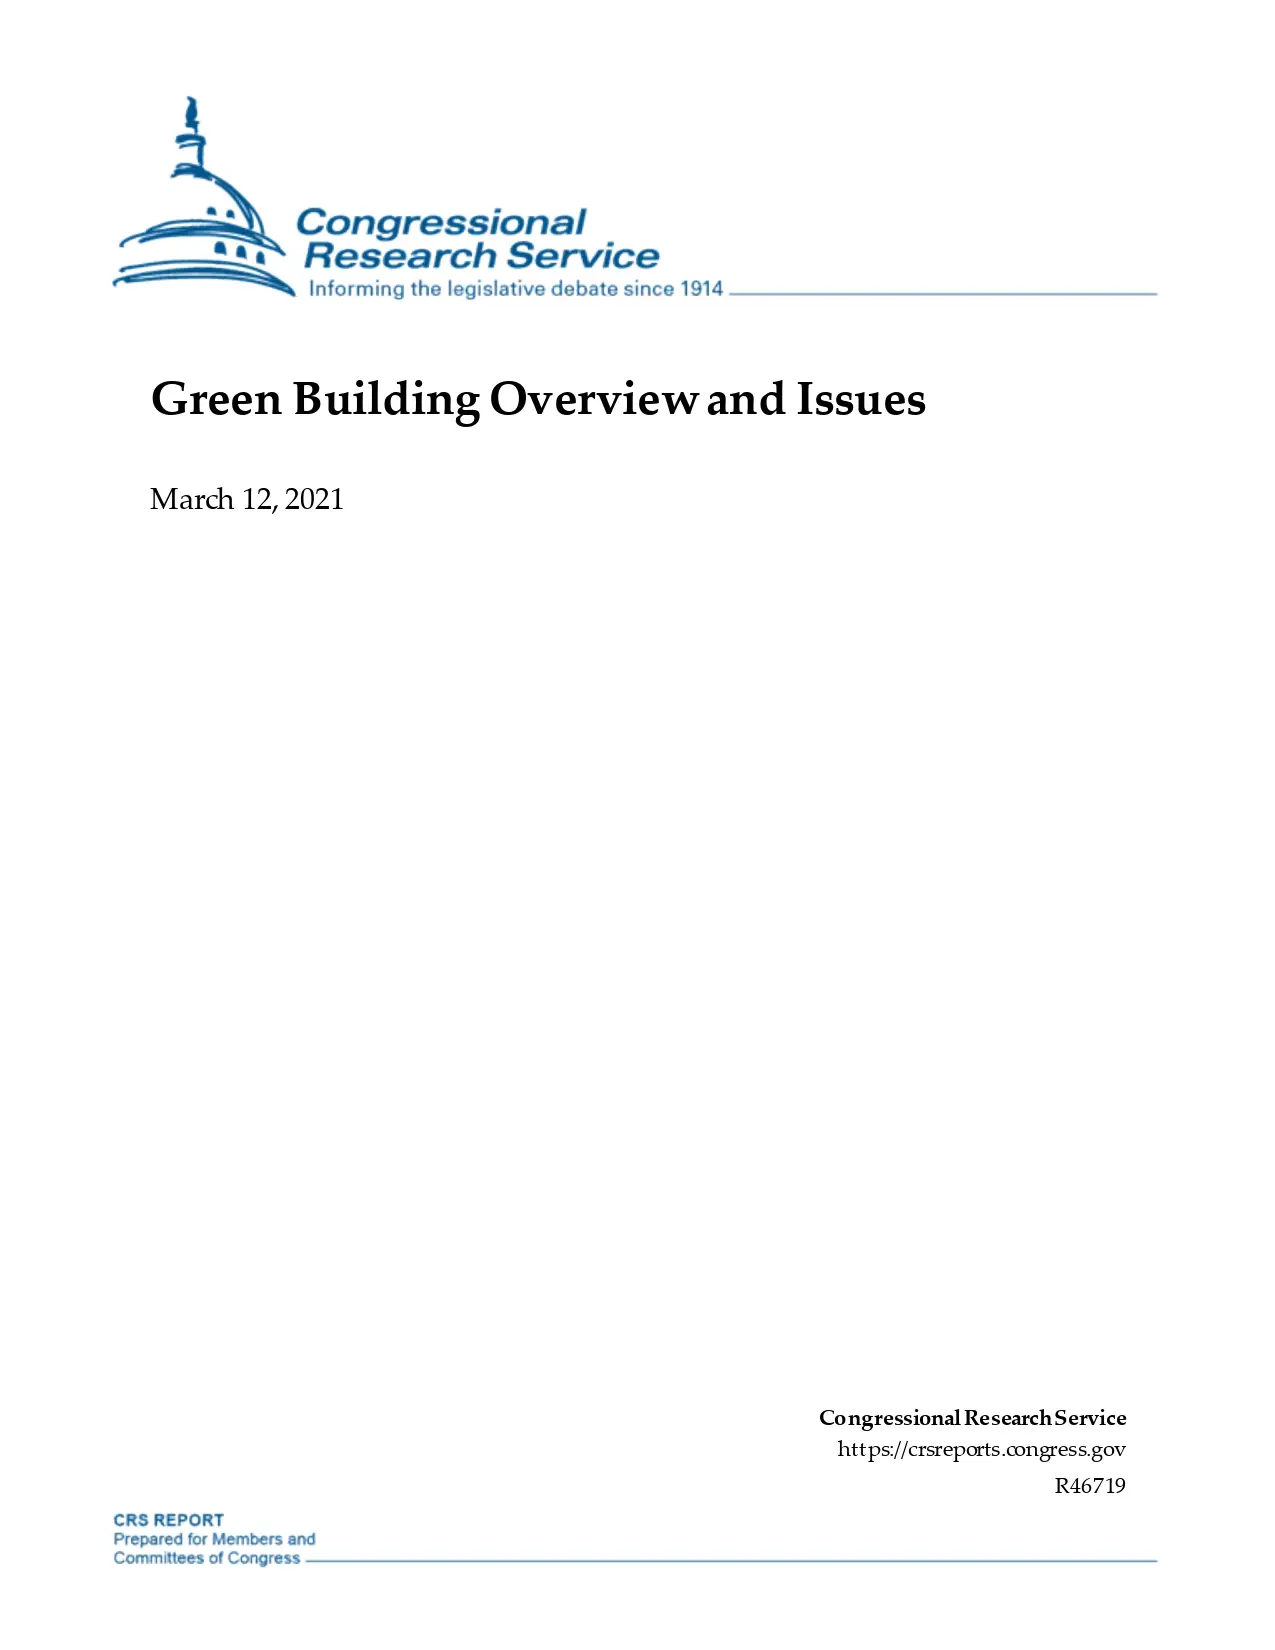 Green Building Overview and Issues